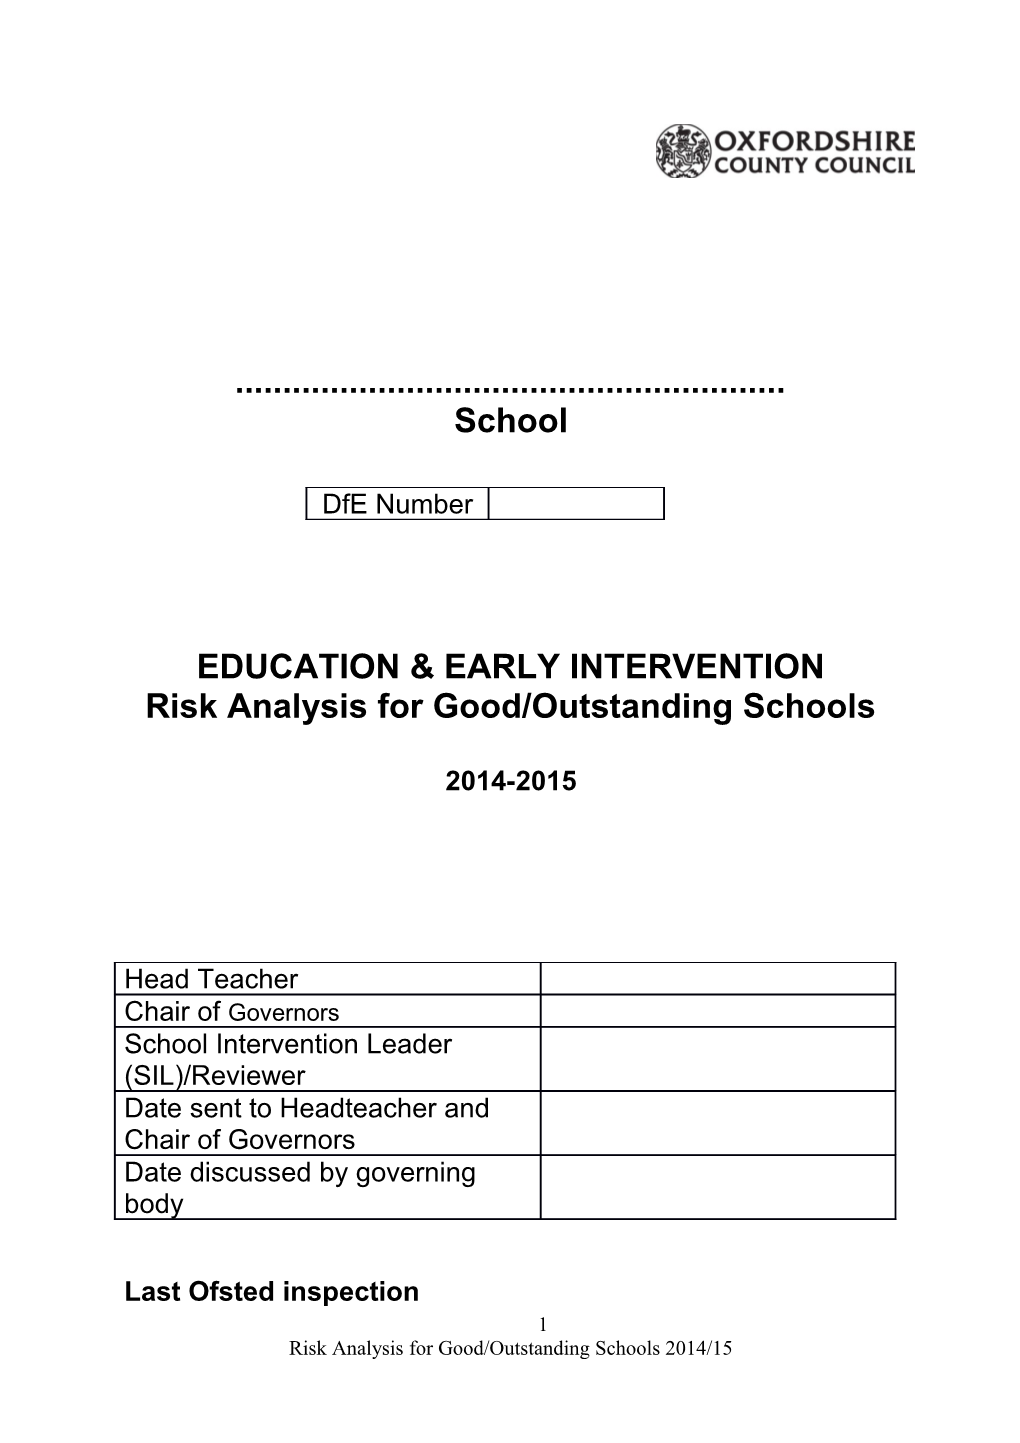 Risk Analysis for Good/Outstanding Schools